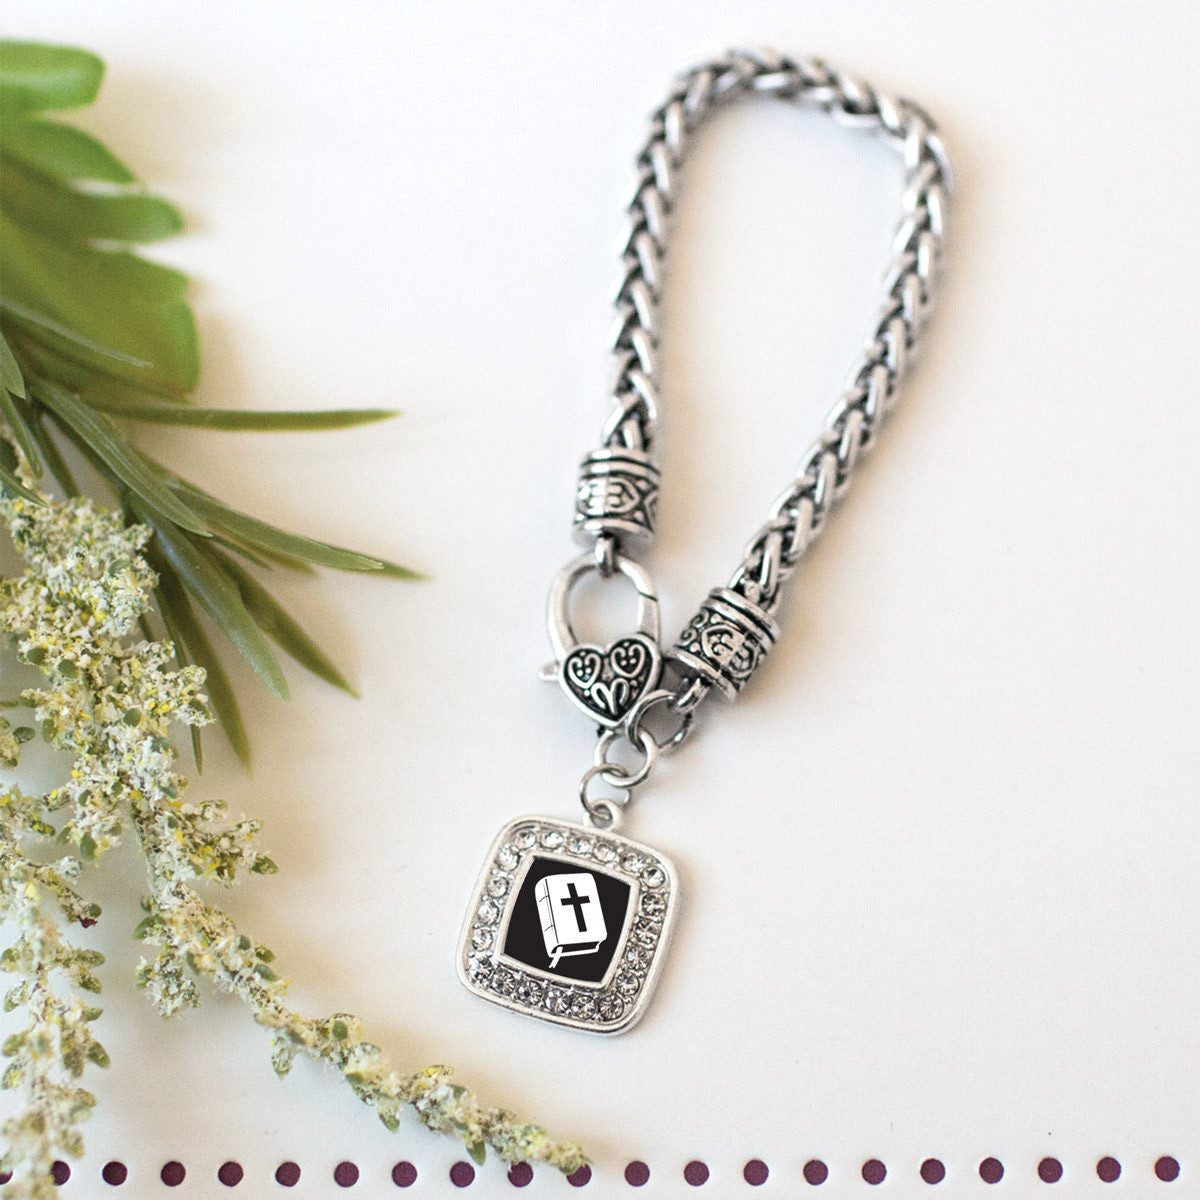 Holy Bible Charm Jewelry Collection